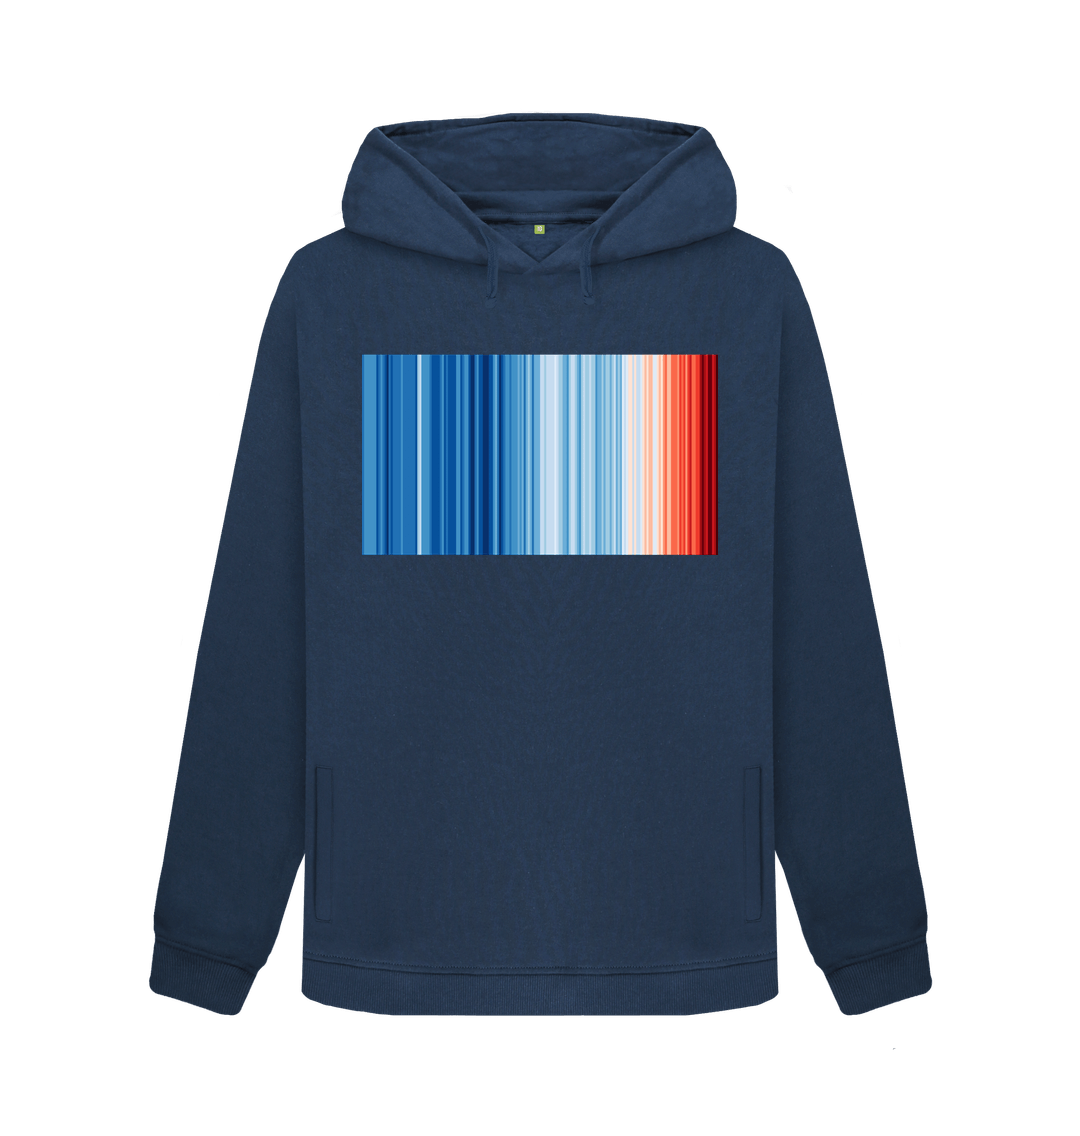 Women's #ShowYourStripes pullover hoodie